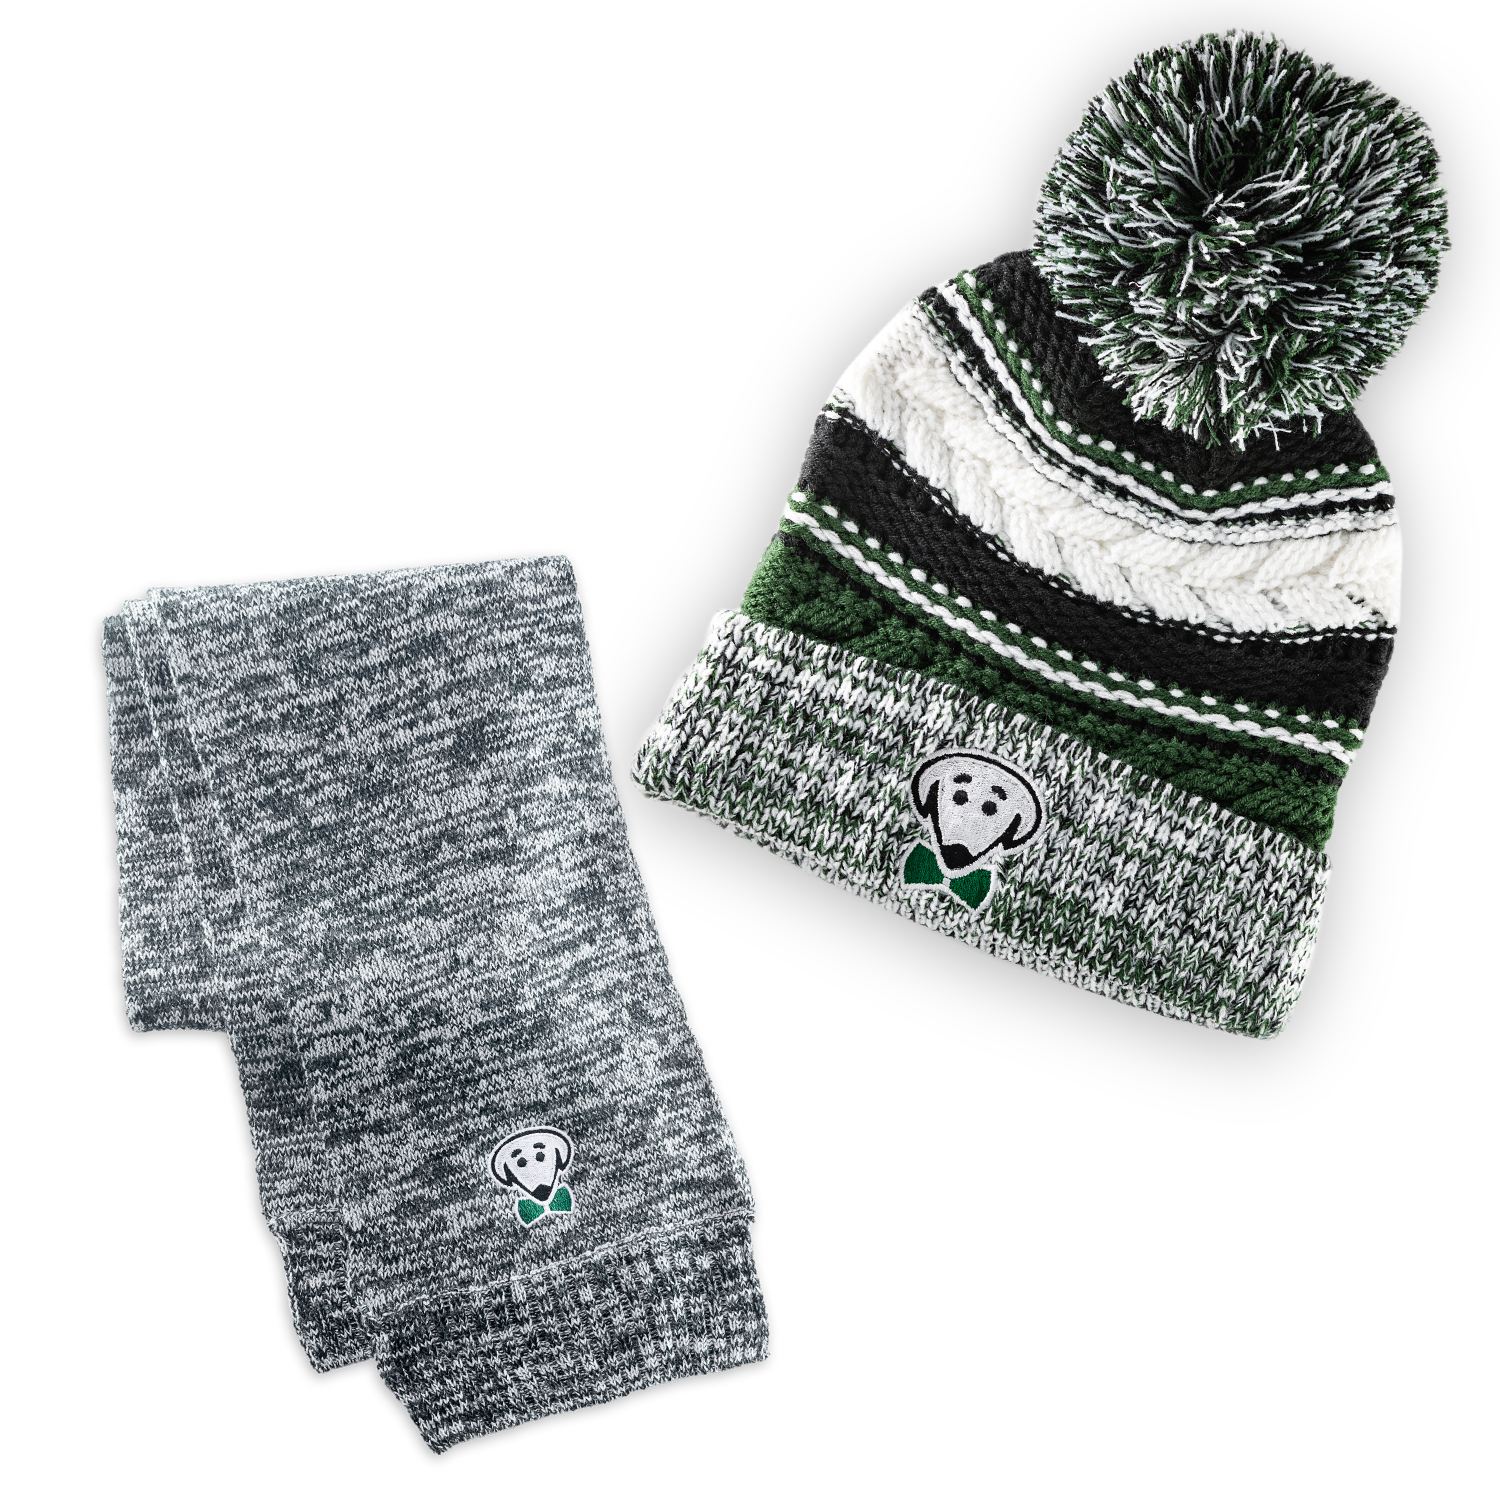 Beau Tyler - Riley hat and scarf set green